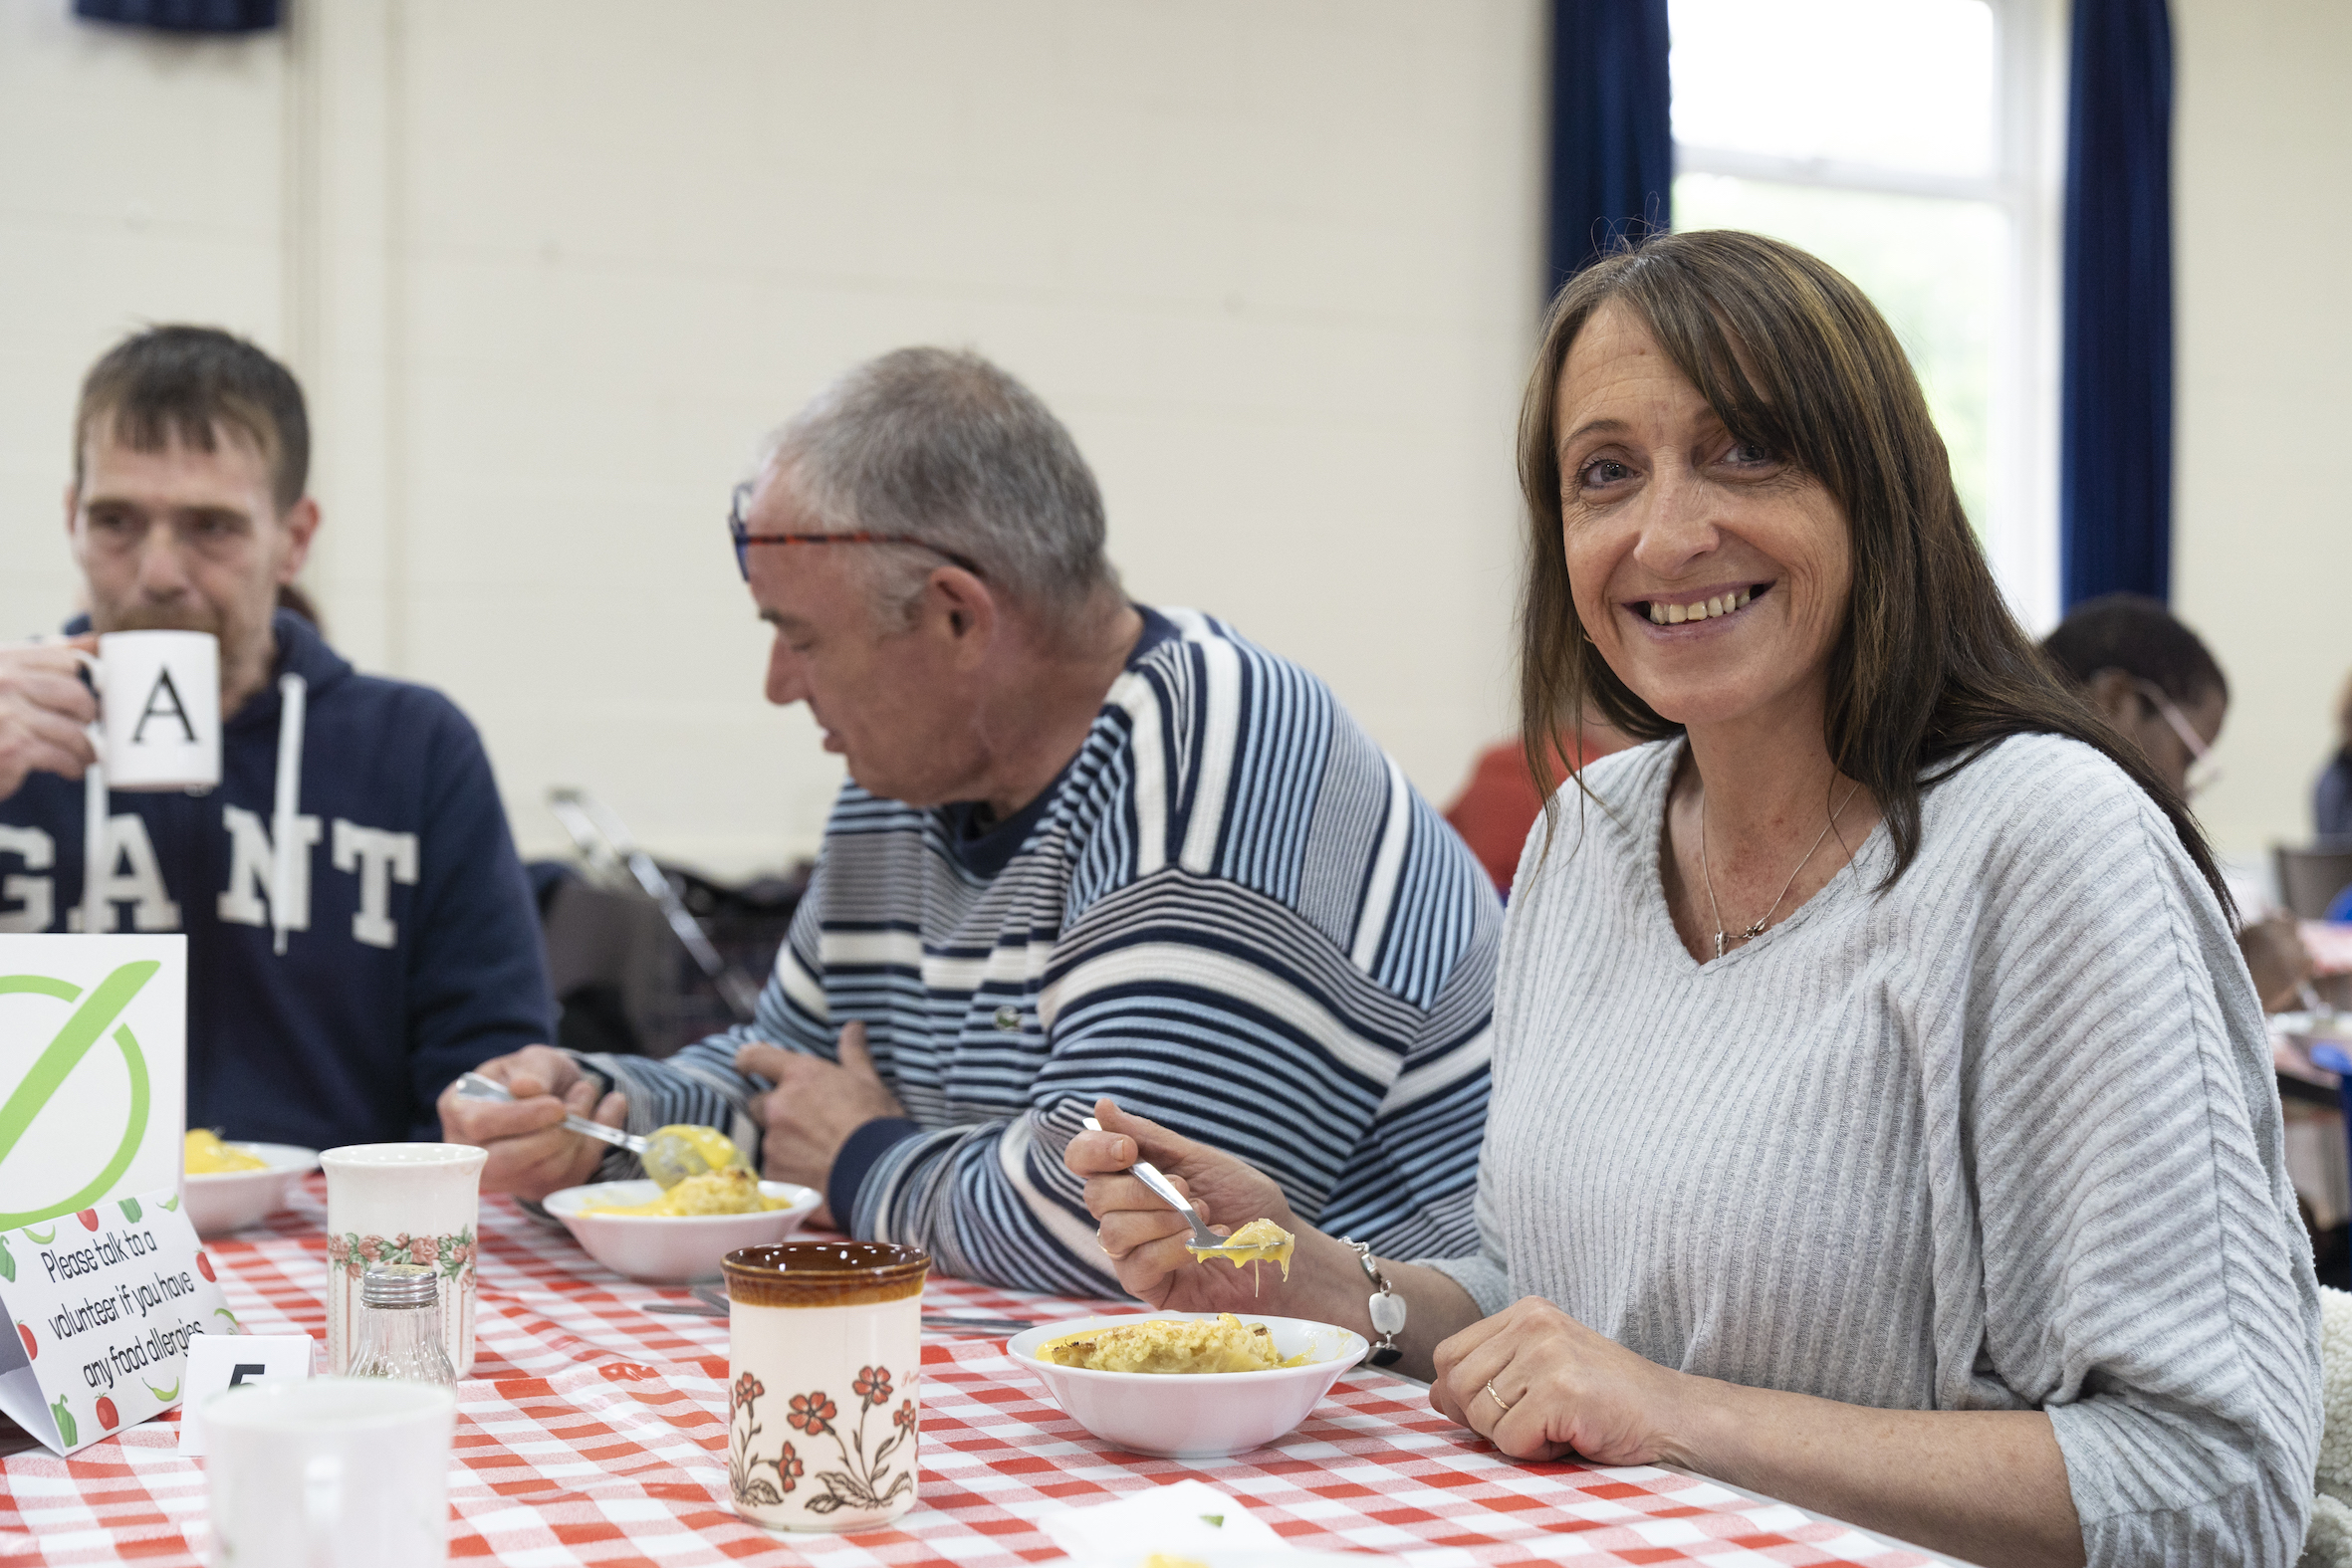 Blue Monday - Is Community Dining fights loneliness and food insecurity